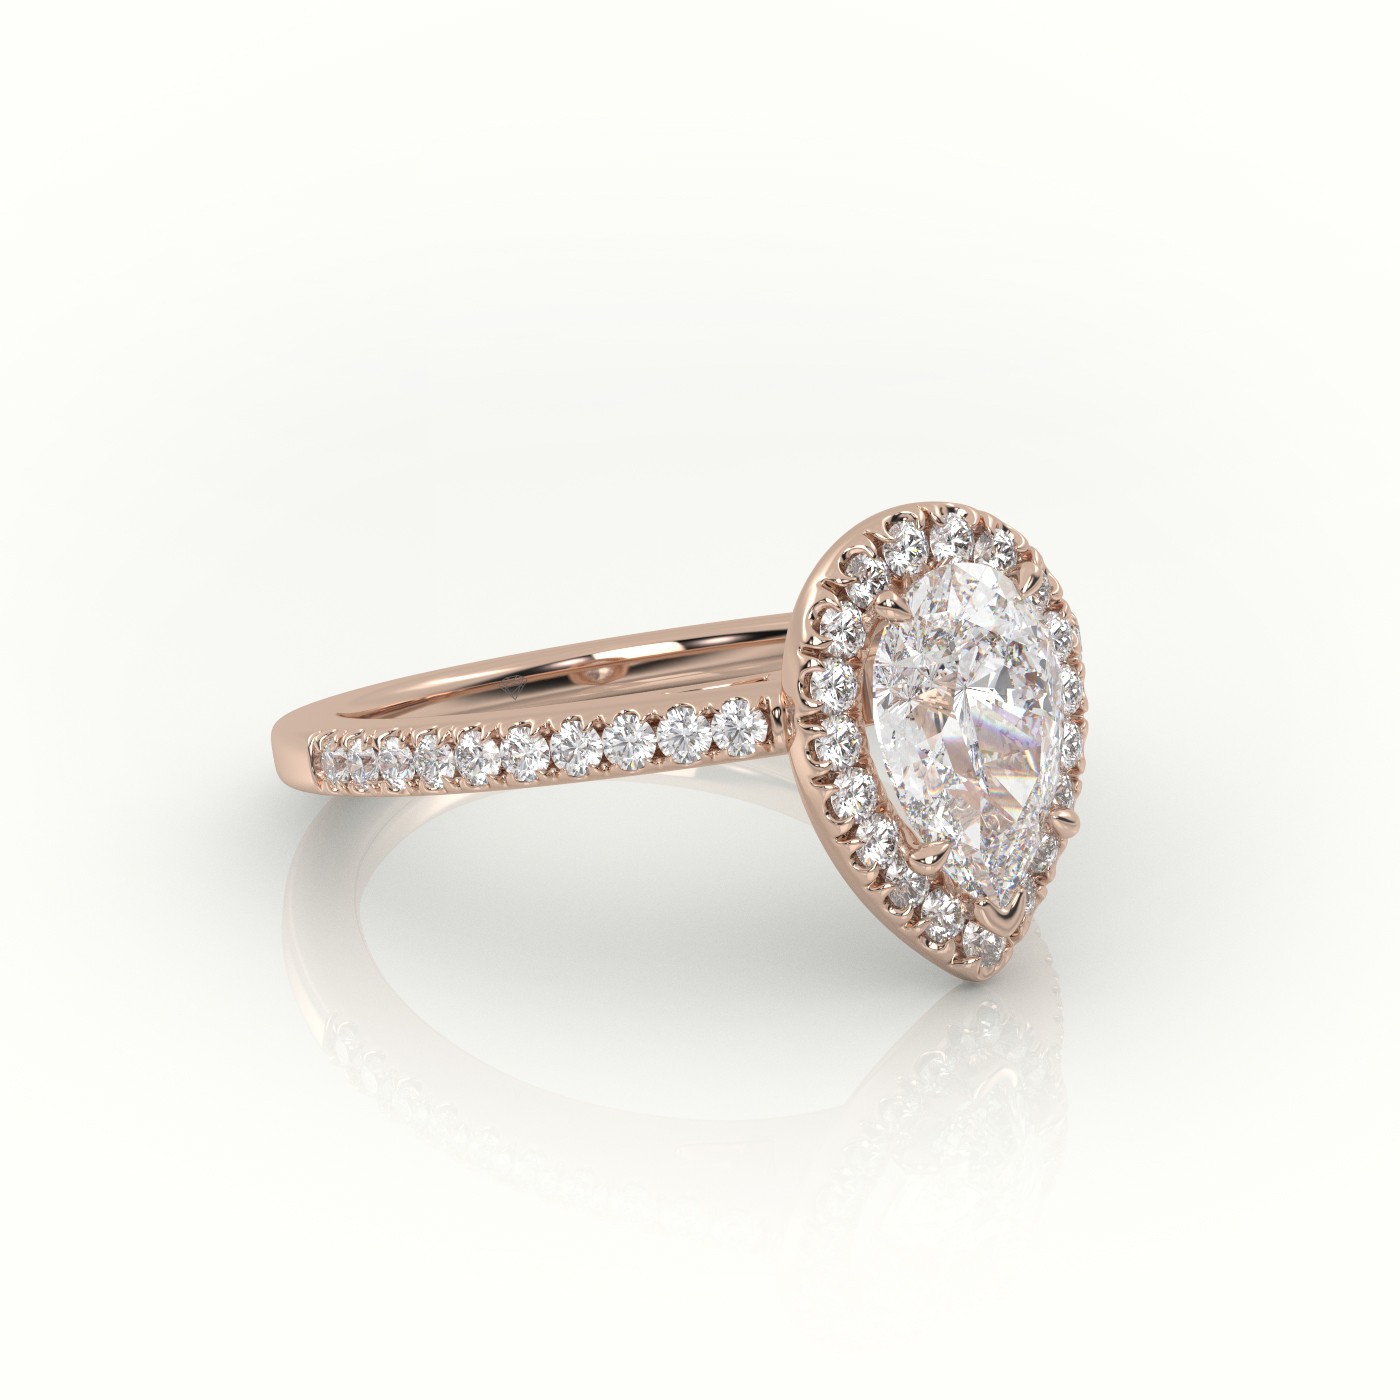 18K ROSE GOLD PEAR CUT DIAMOND HALO PAVE SETTING ENGAGEMENT RING